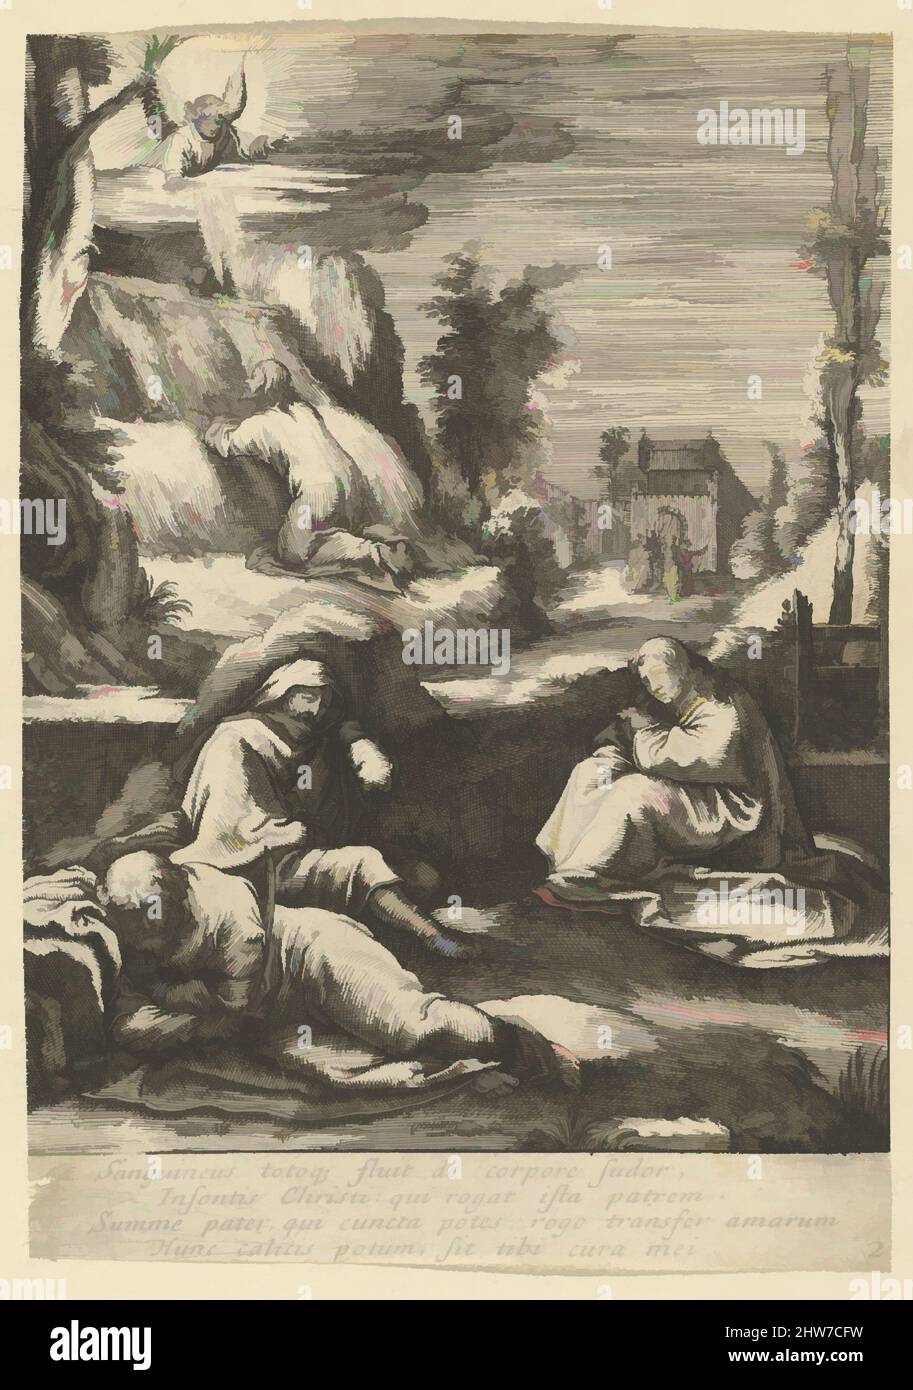 Art inspired by The Agony in the Garden, from The Passion of Christ, mid 17th century, Etching, Sheet: 5 3/8 × 3 3/4 in. (13.6 × 9.6 cm), Prints, Nicolas Cochin (French, Troyes 1610–1686 Paris), After Hendrick Goltzius (Netherlandish, Mühlbracht 1558–1617 Haarlem, Classic works modernized by Artotop with a splash of modernity. Shapes, color and value, eye-catching visual impact on art. Emotions through freedom of artworks in a contemporary way. A timeless message pursuing a wildly creative new direction. Artists turning to the digital medium and creating the Artotop NFT Stock Photo